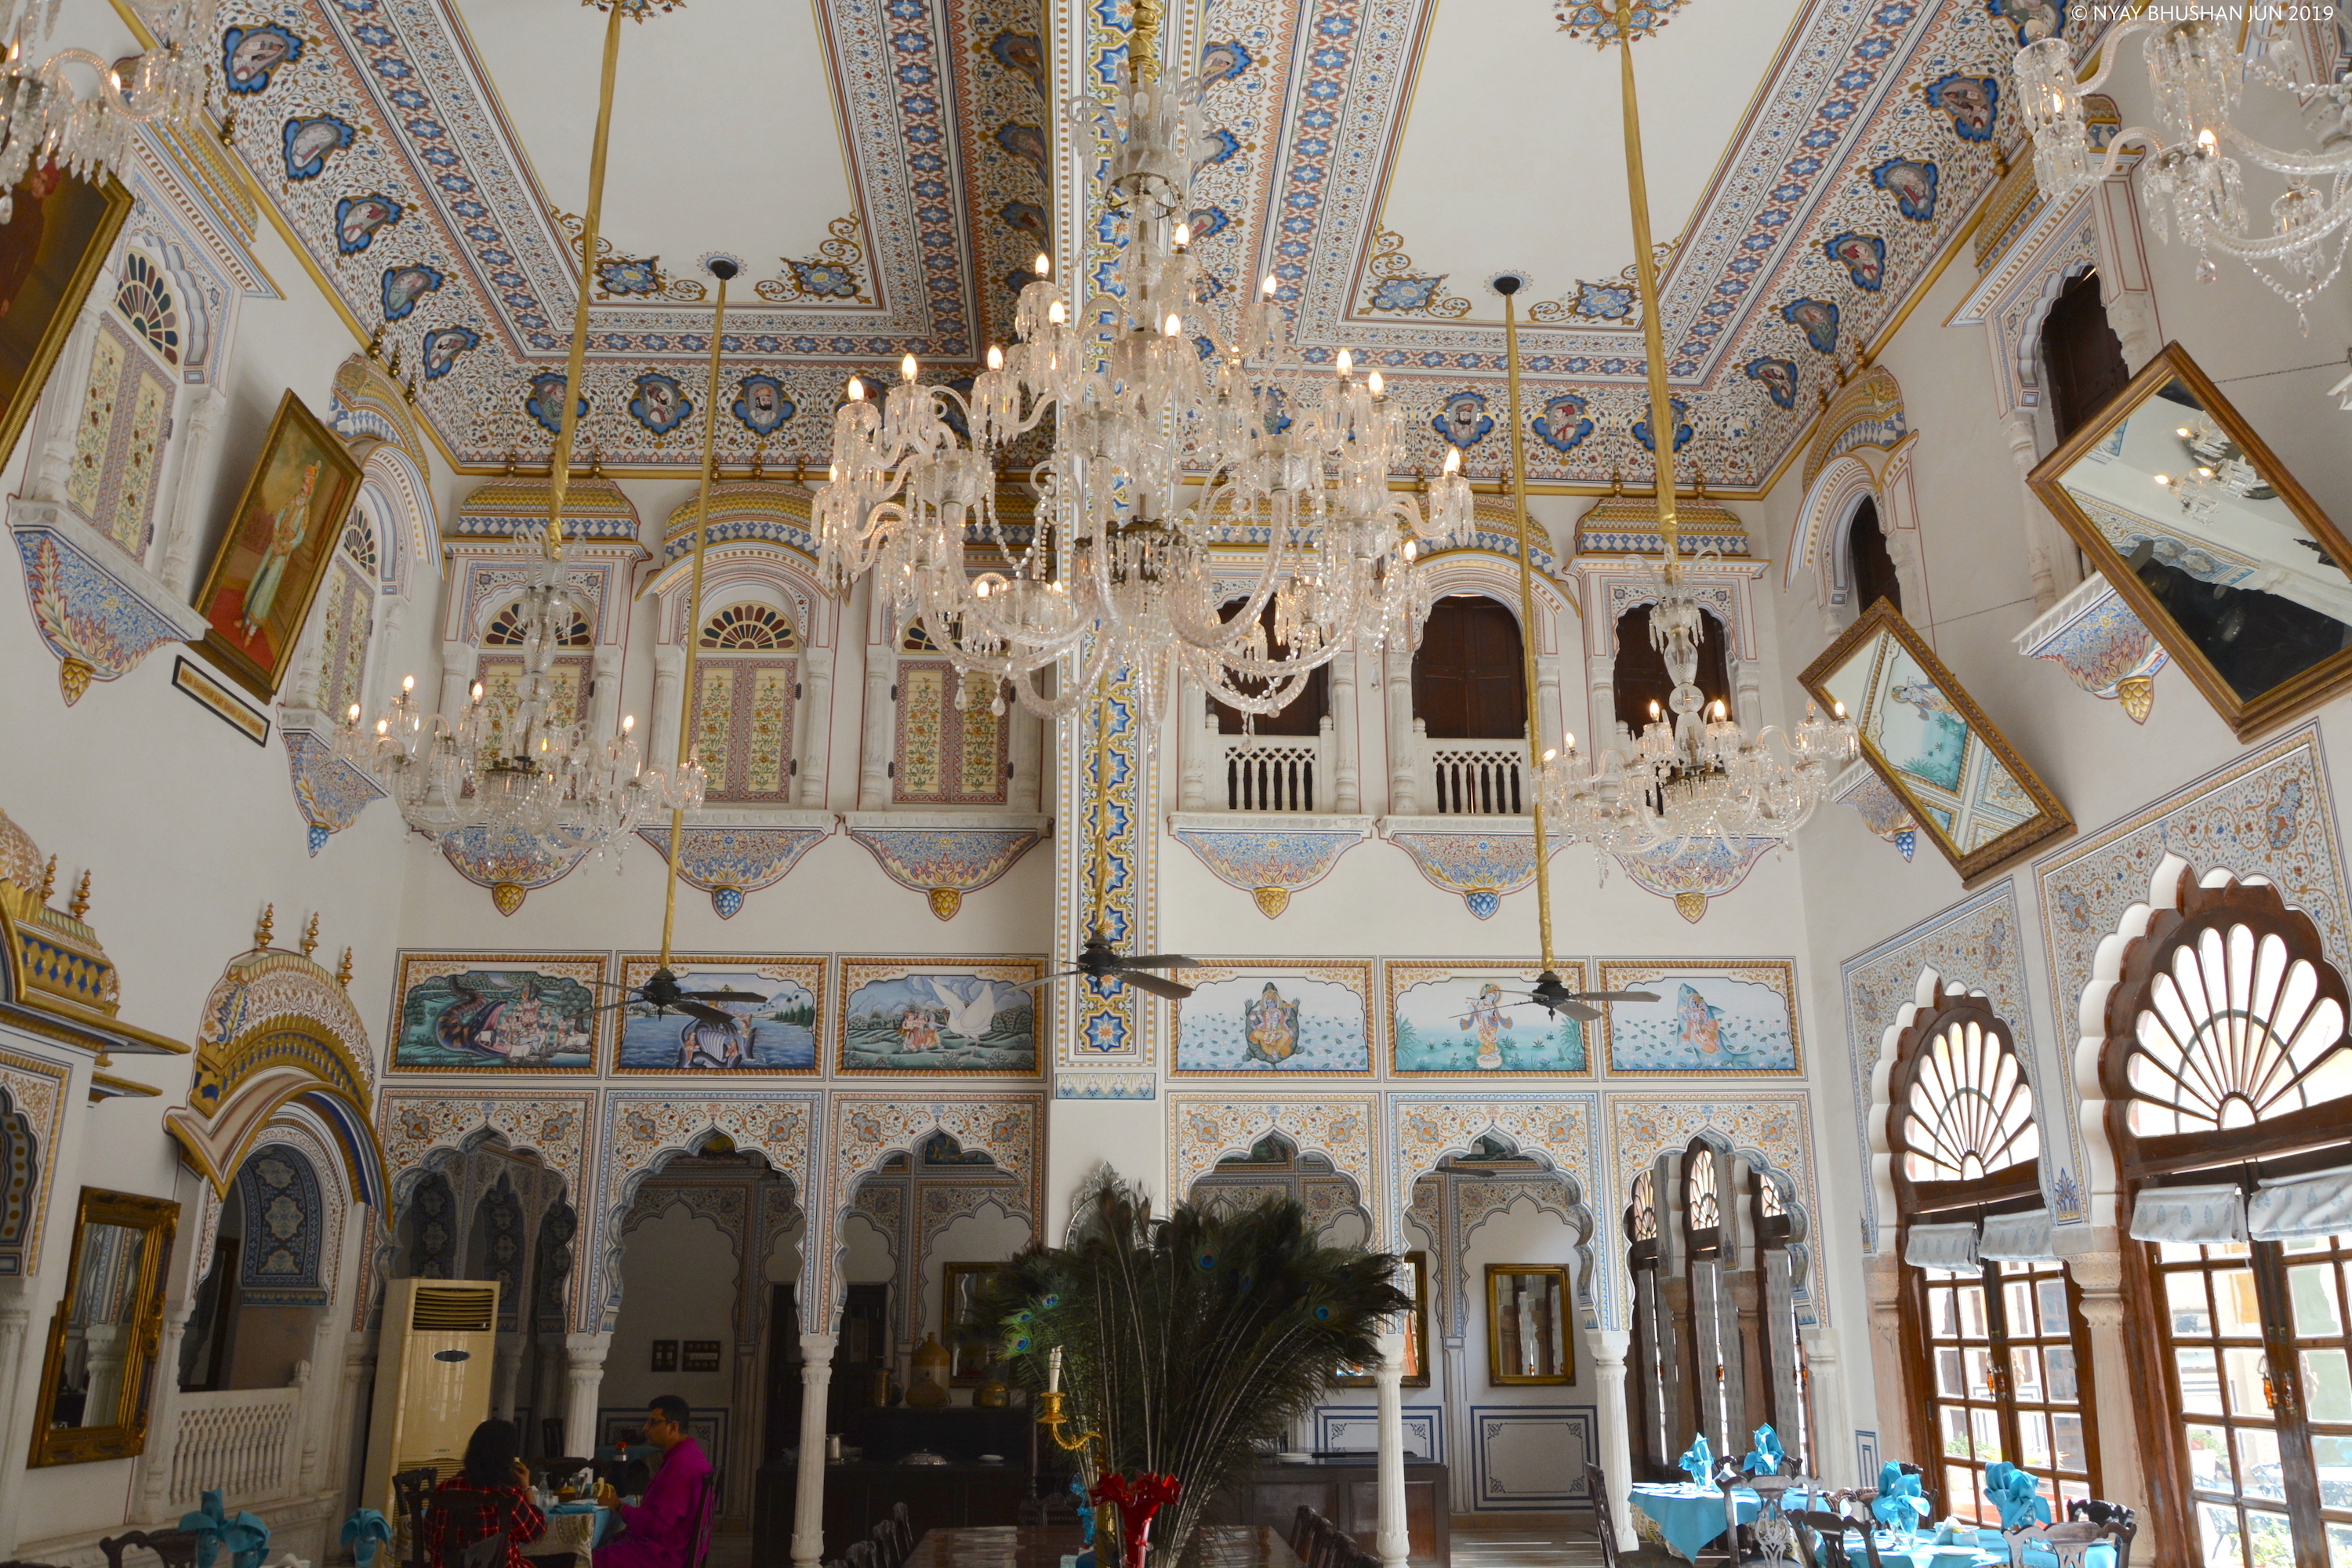 Alsisar Mahal Rajasthan - Exquisite Dining Hall